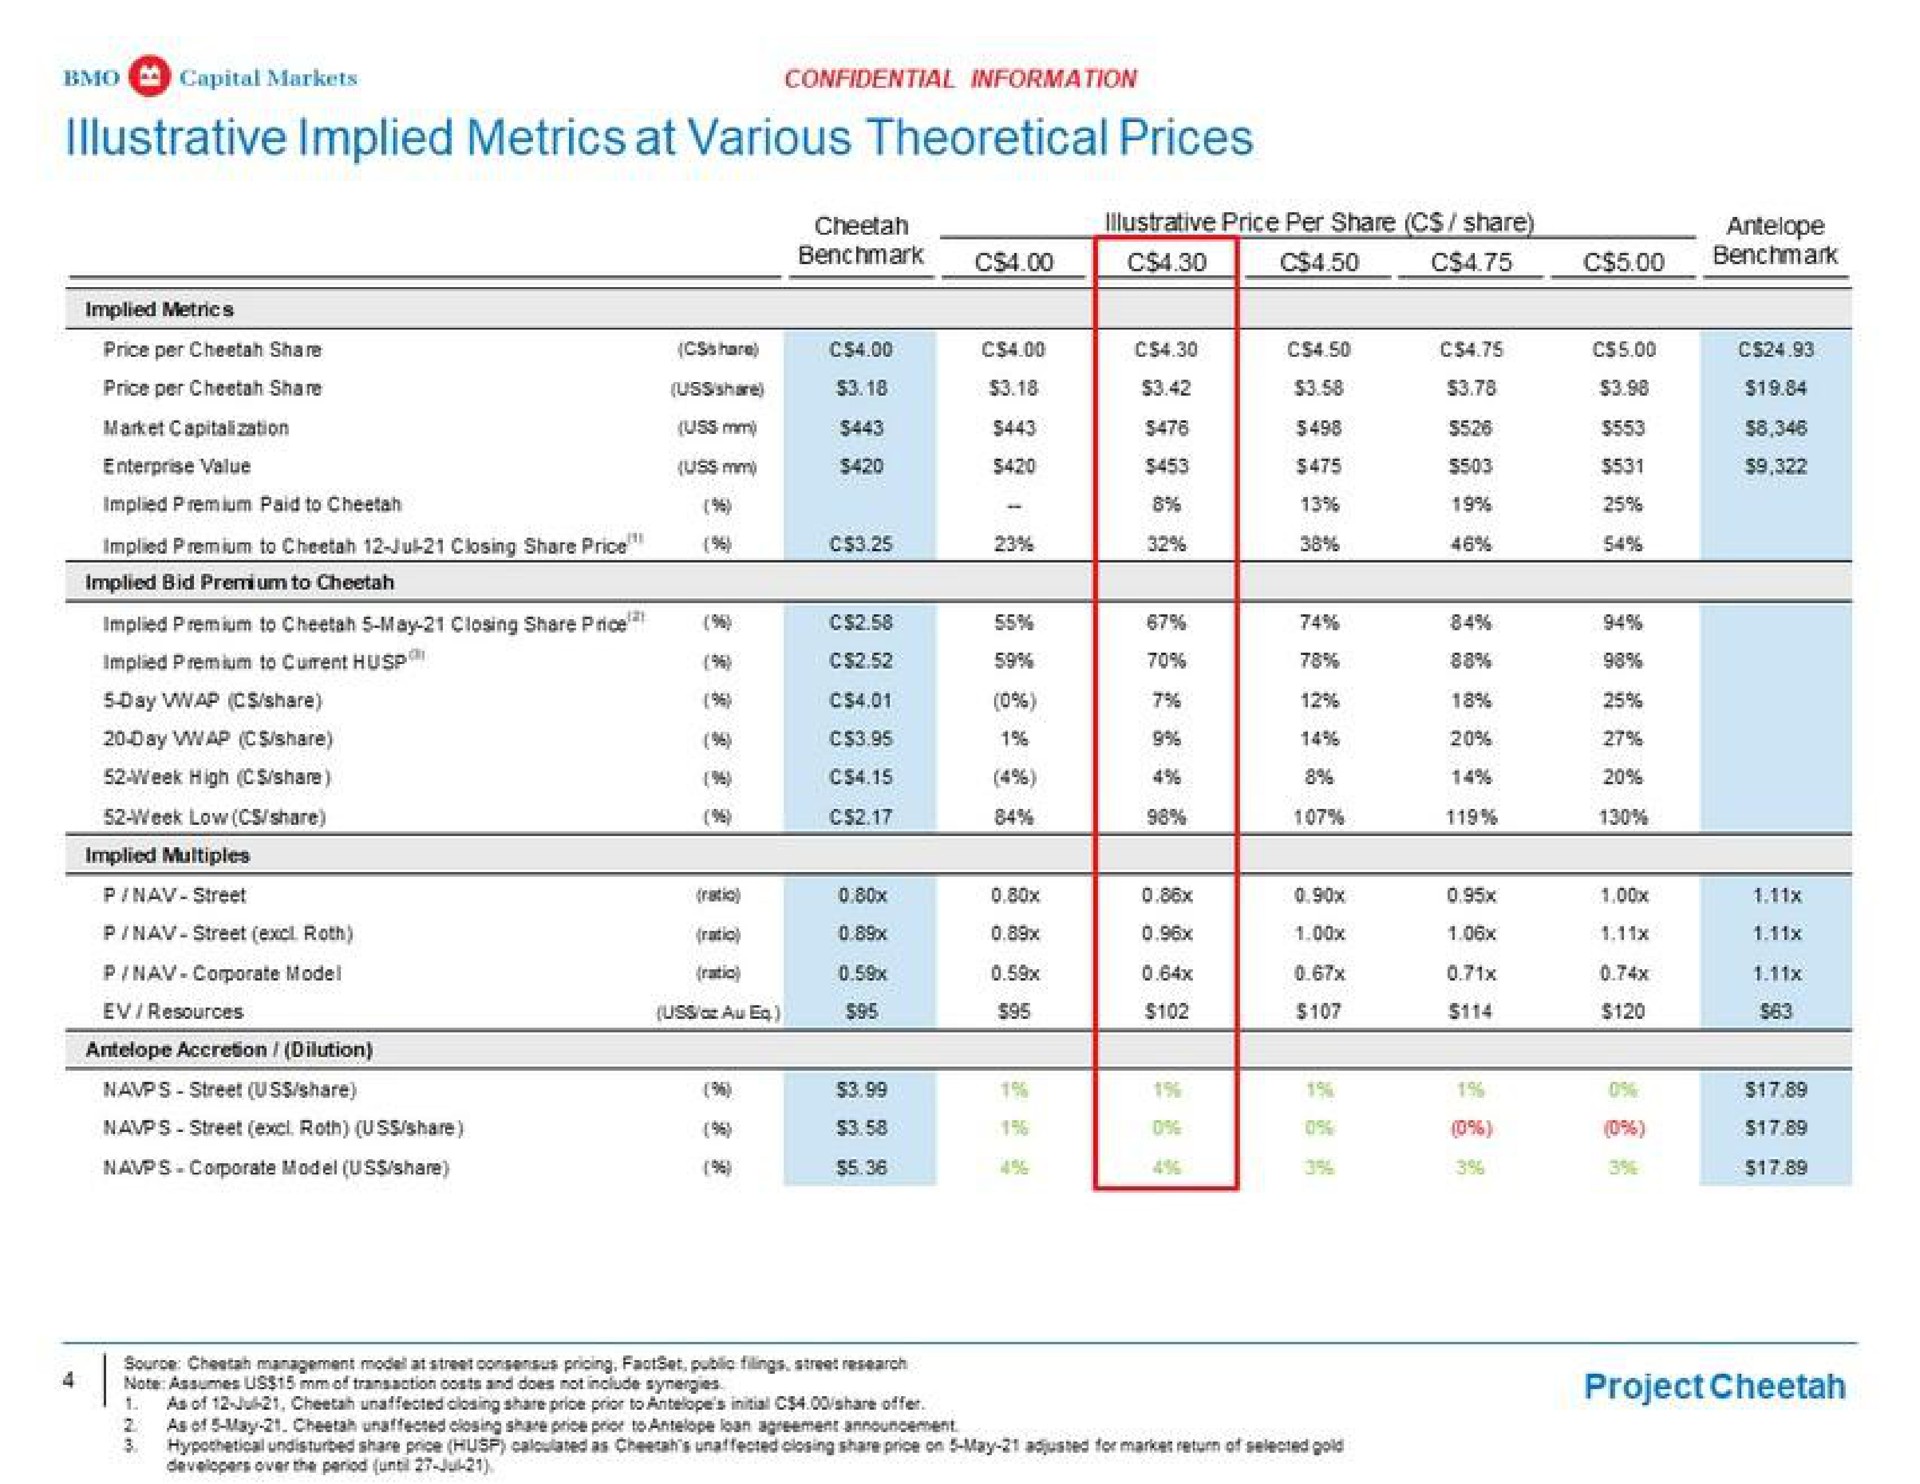 capital markers implied metrics at various theoretical prices confidential information | BMO Capital Markets